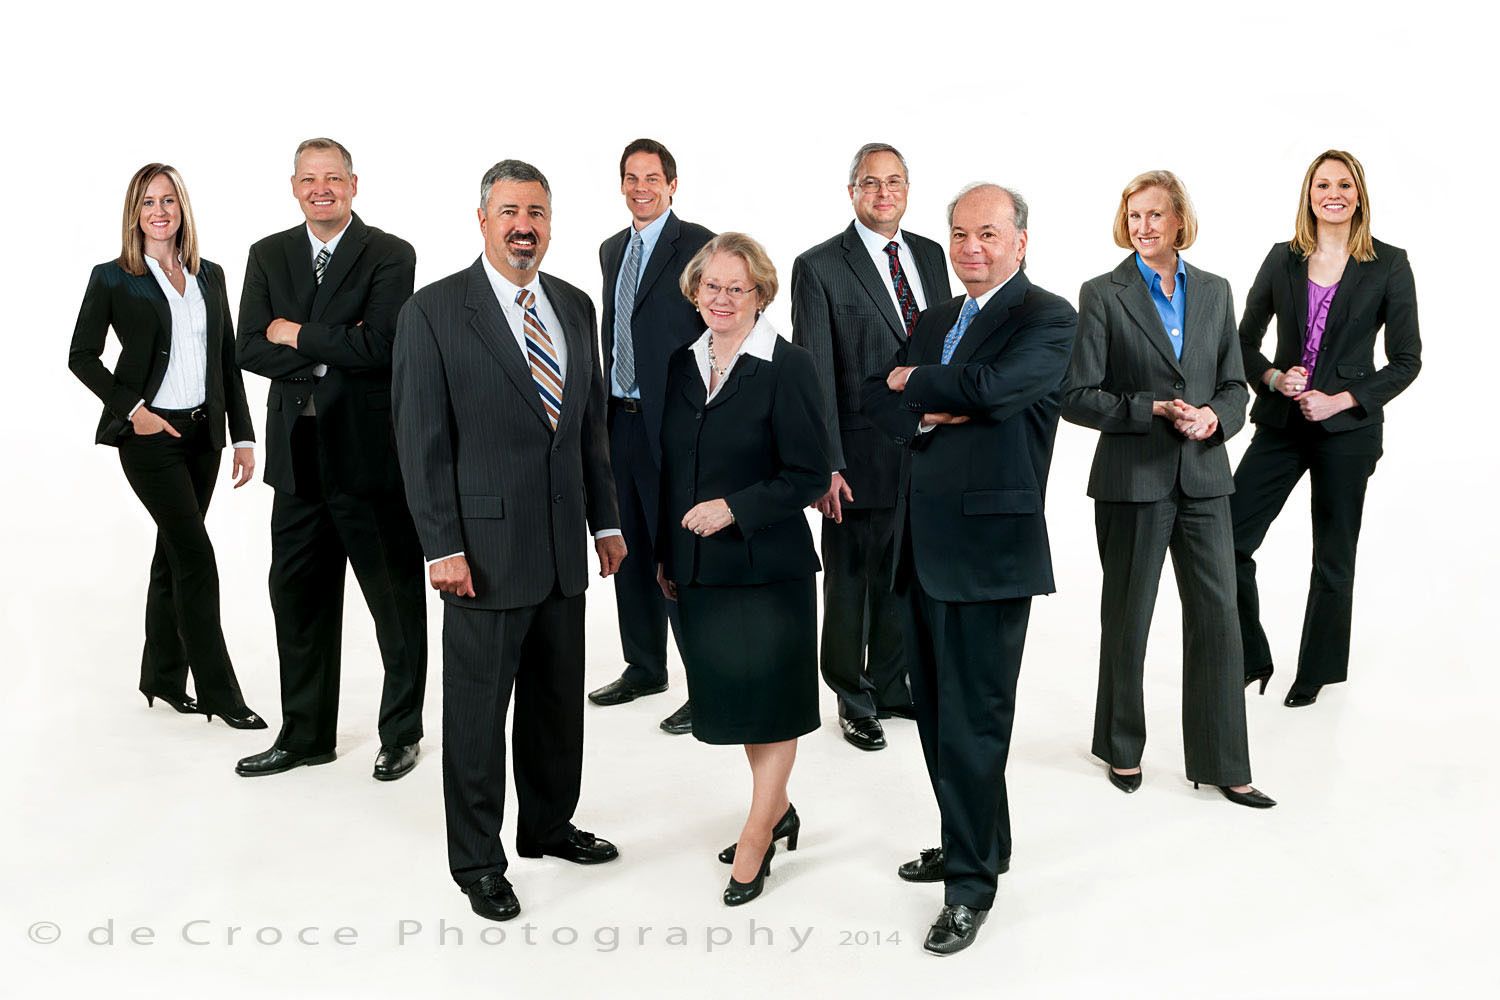 Formal-Business-Group-Photography